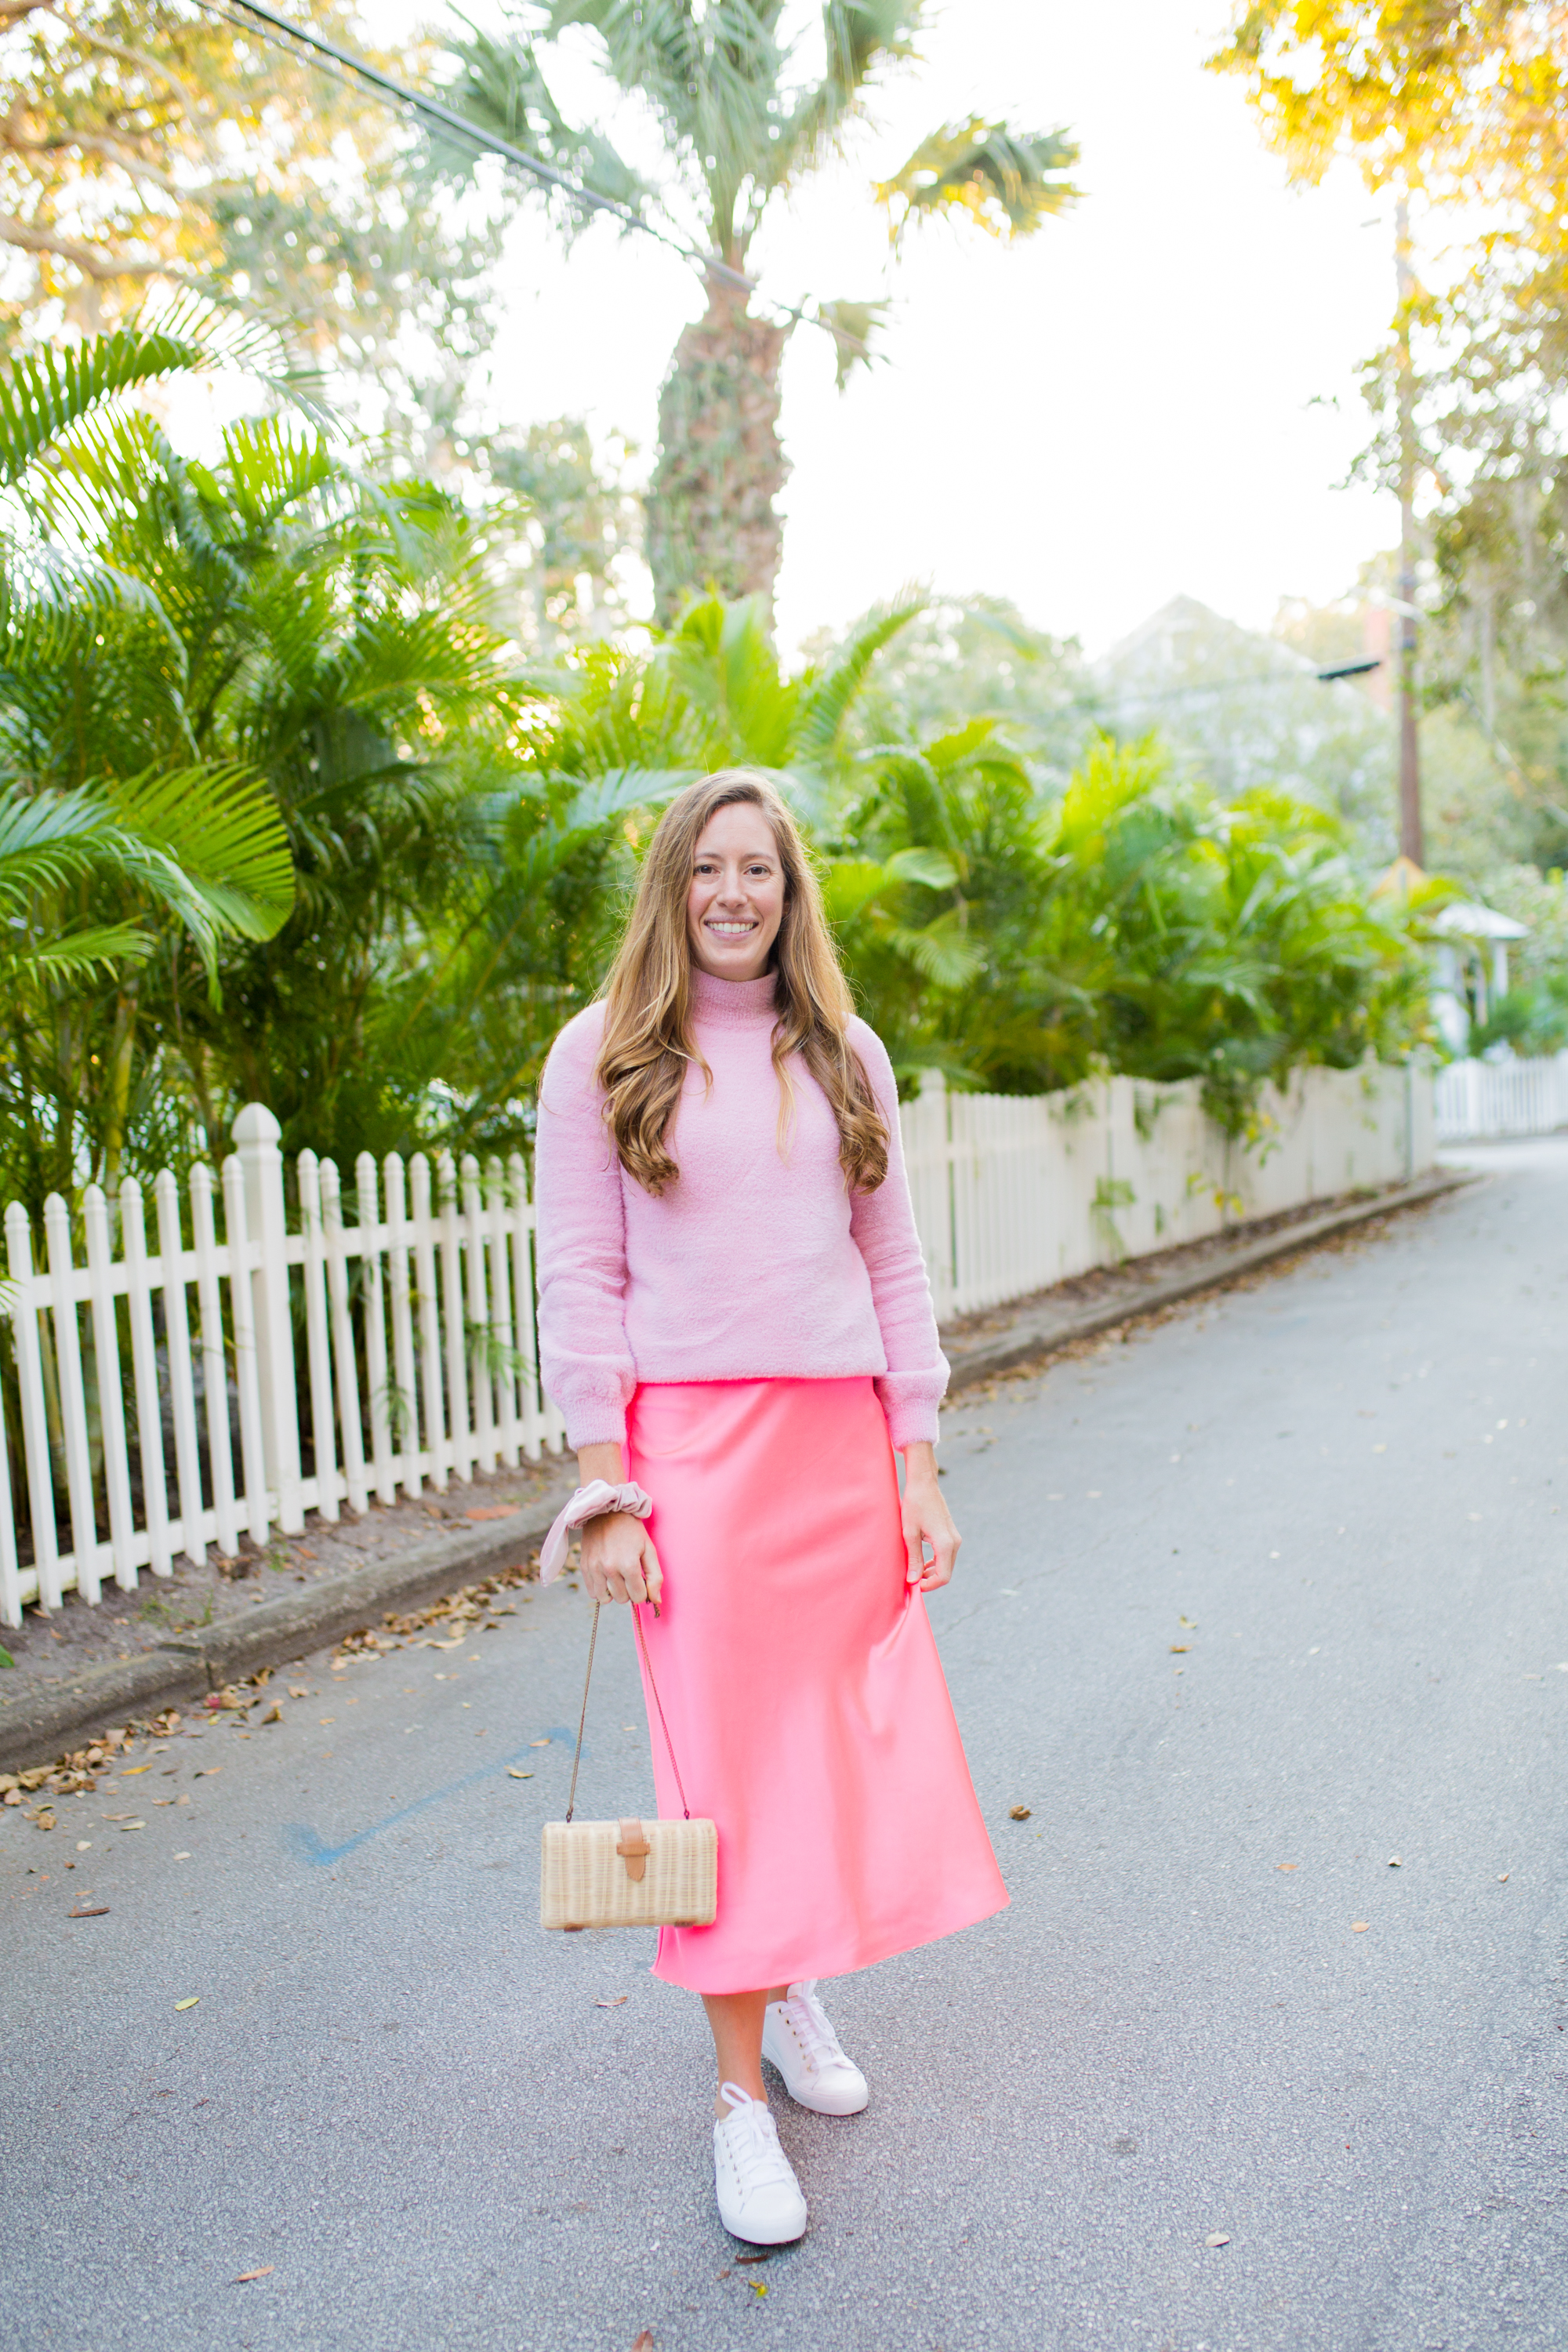 Colorful Monochromatic Winter Outfit / Winter Brights outfit / pink monochromatic outfit / bright colored outfits / pop of color outfits / silk slip skirt / white sneakers / valentines day outfit / straw bag - Sunshine Style, A Florida Fashion and Lifestyle Blog 